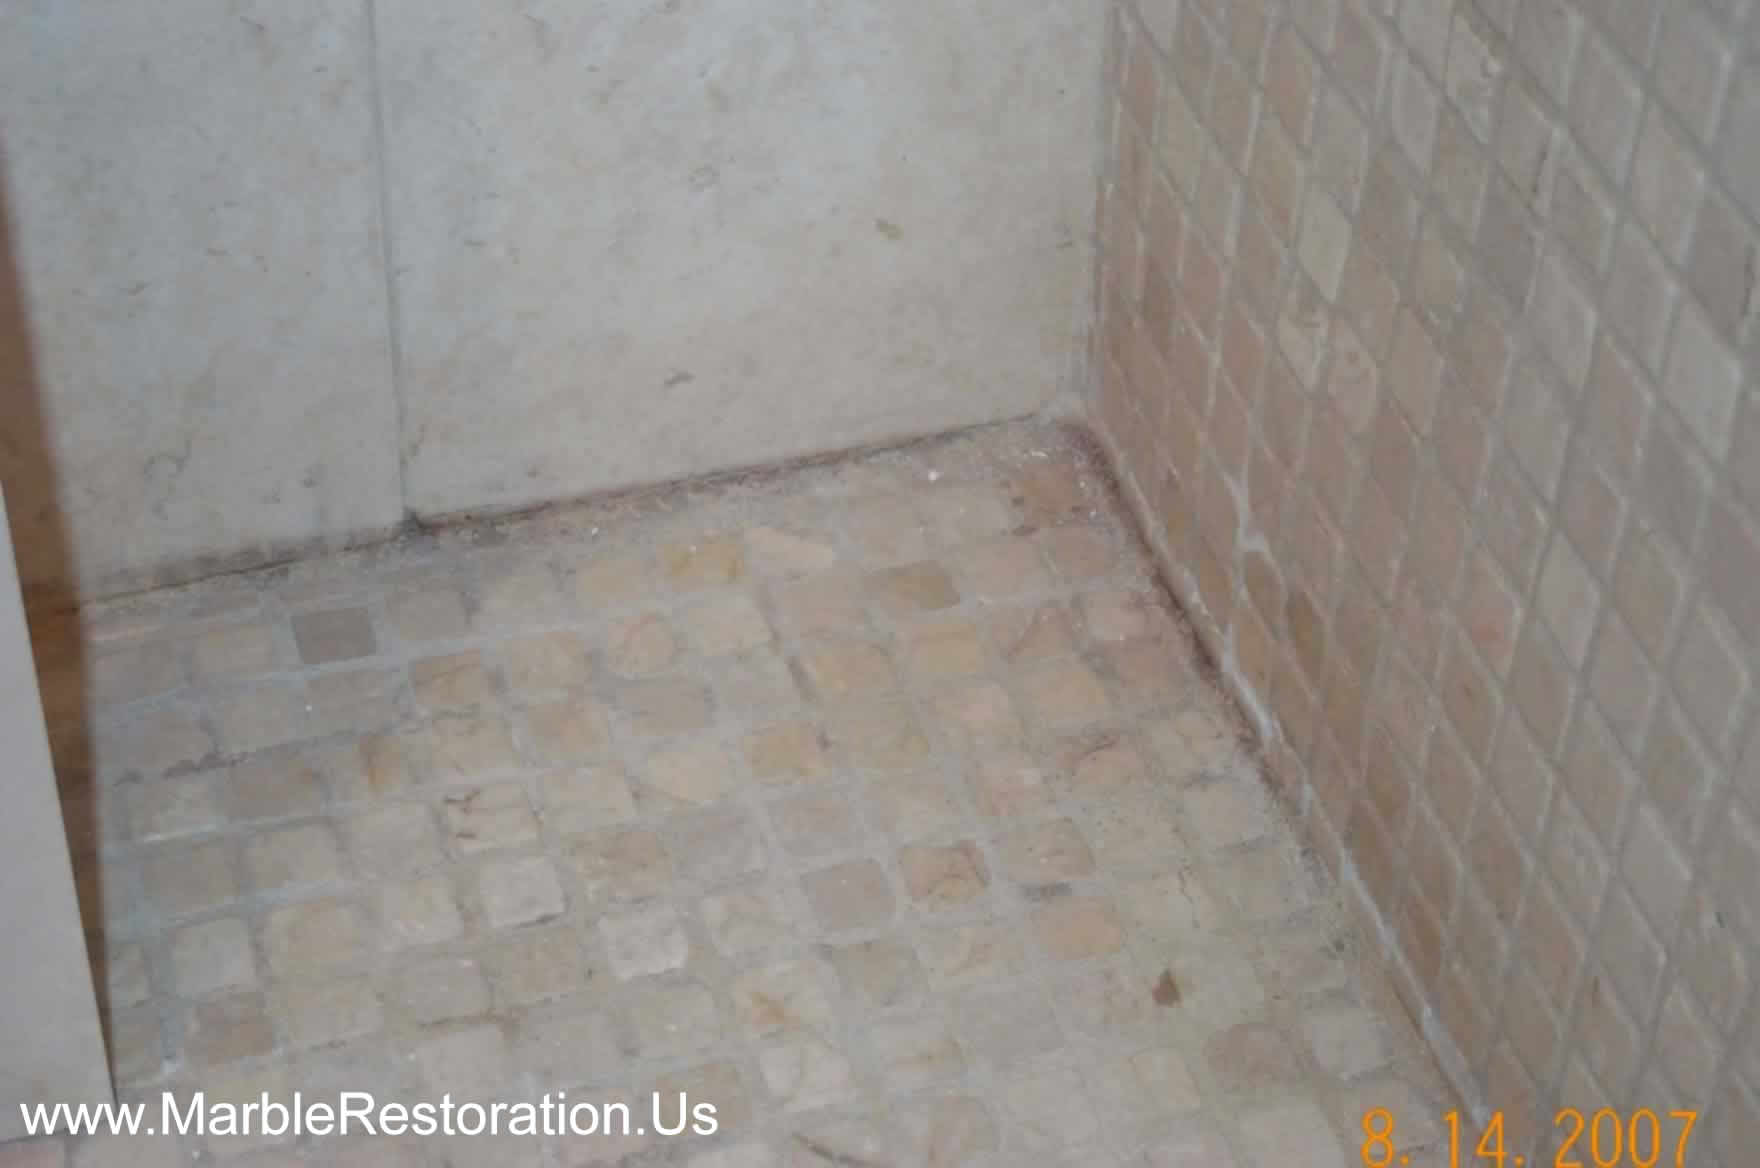 Mold on shower floor removal